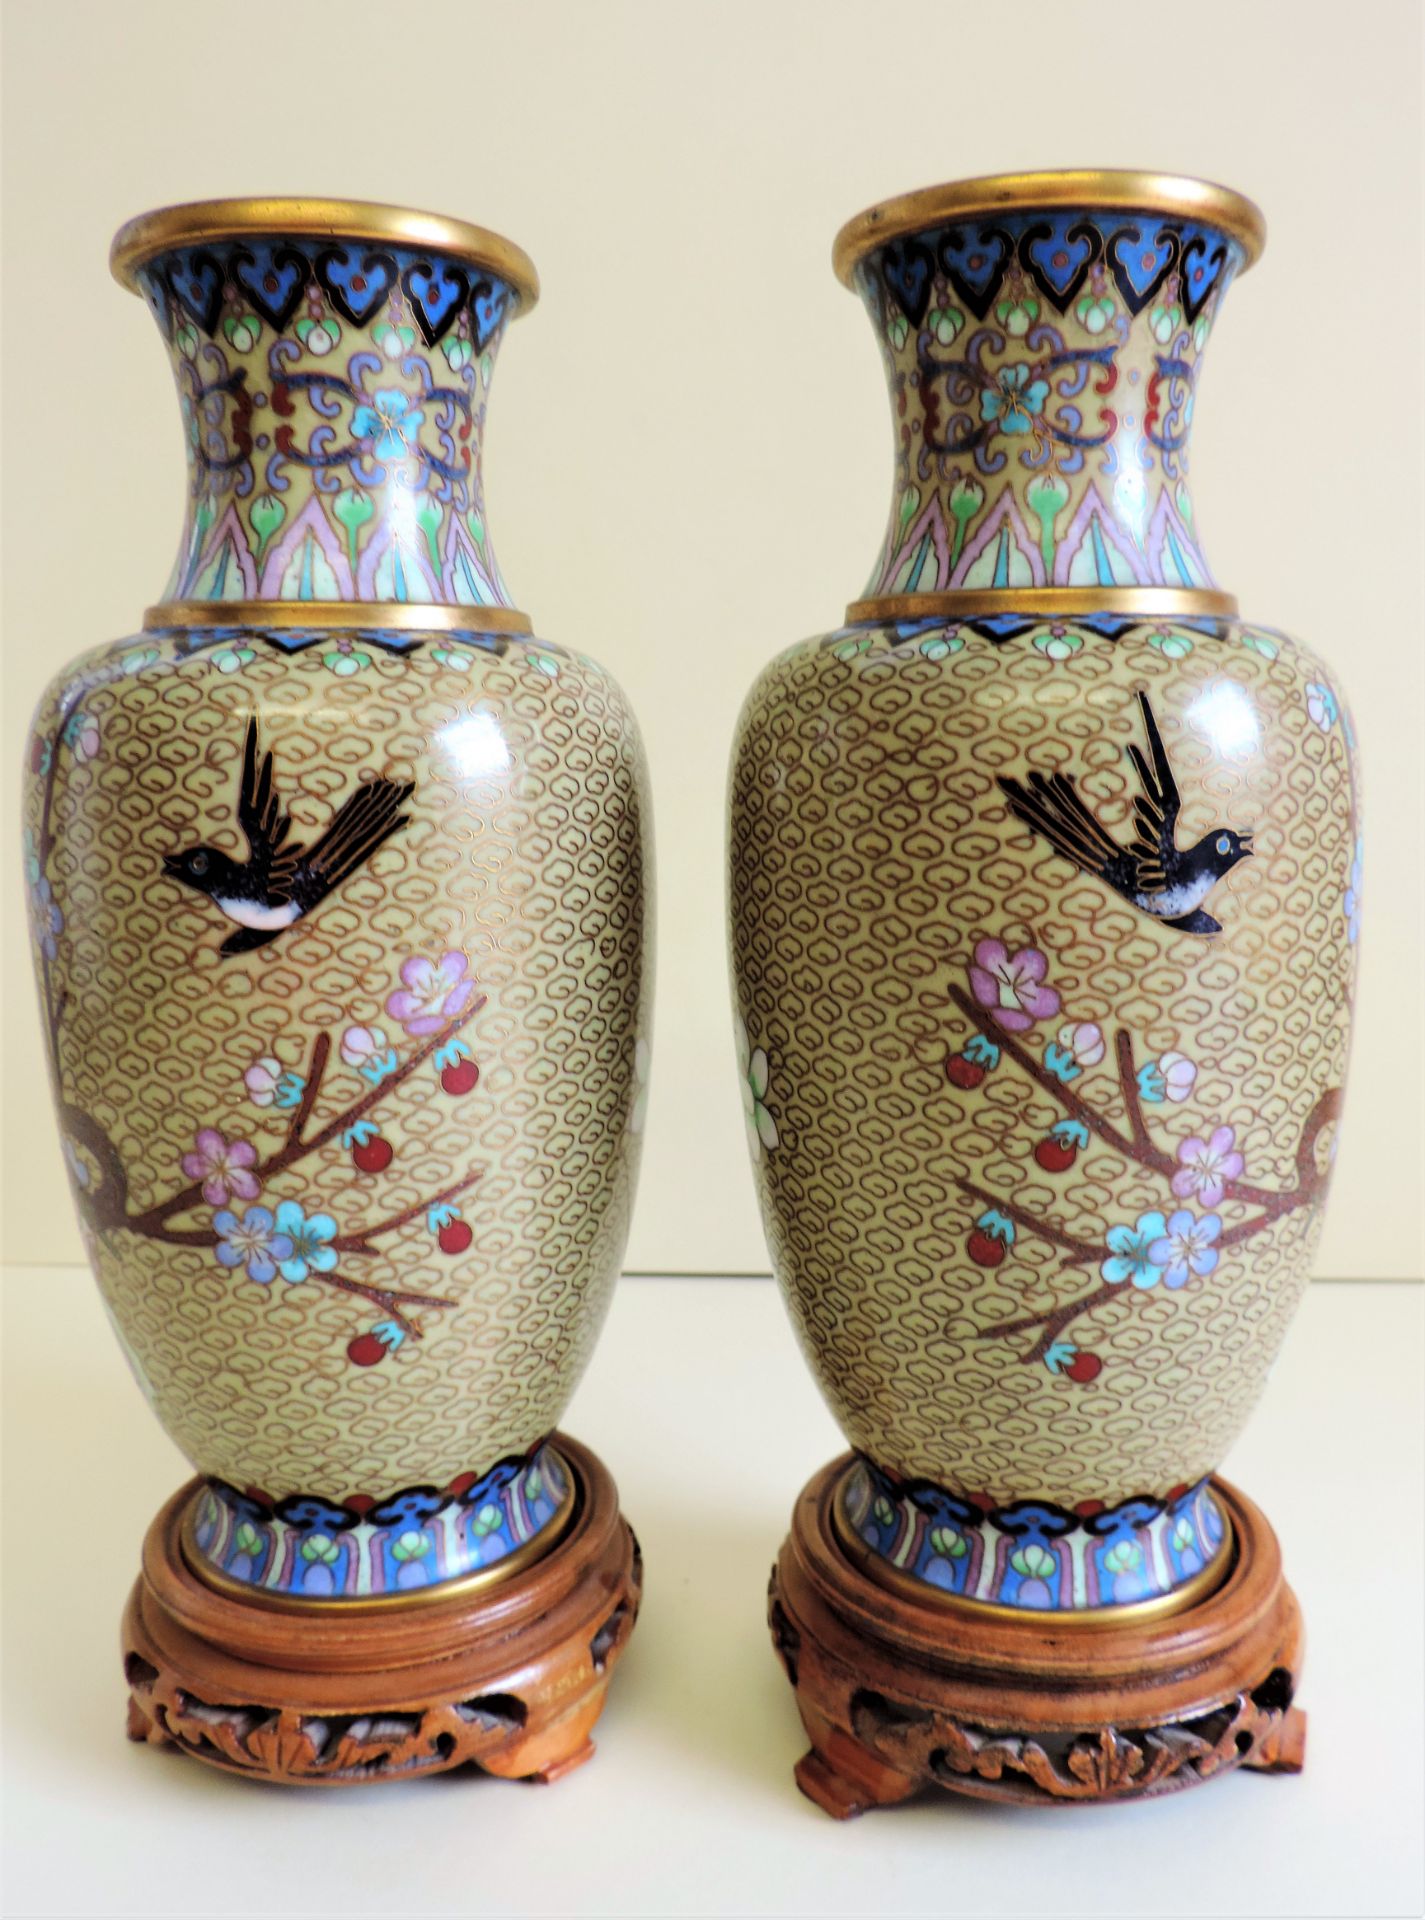 Pair Chinese Cloisonne Vases with Birds & Blossom Decoration 24cm Tall